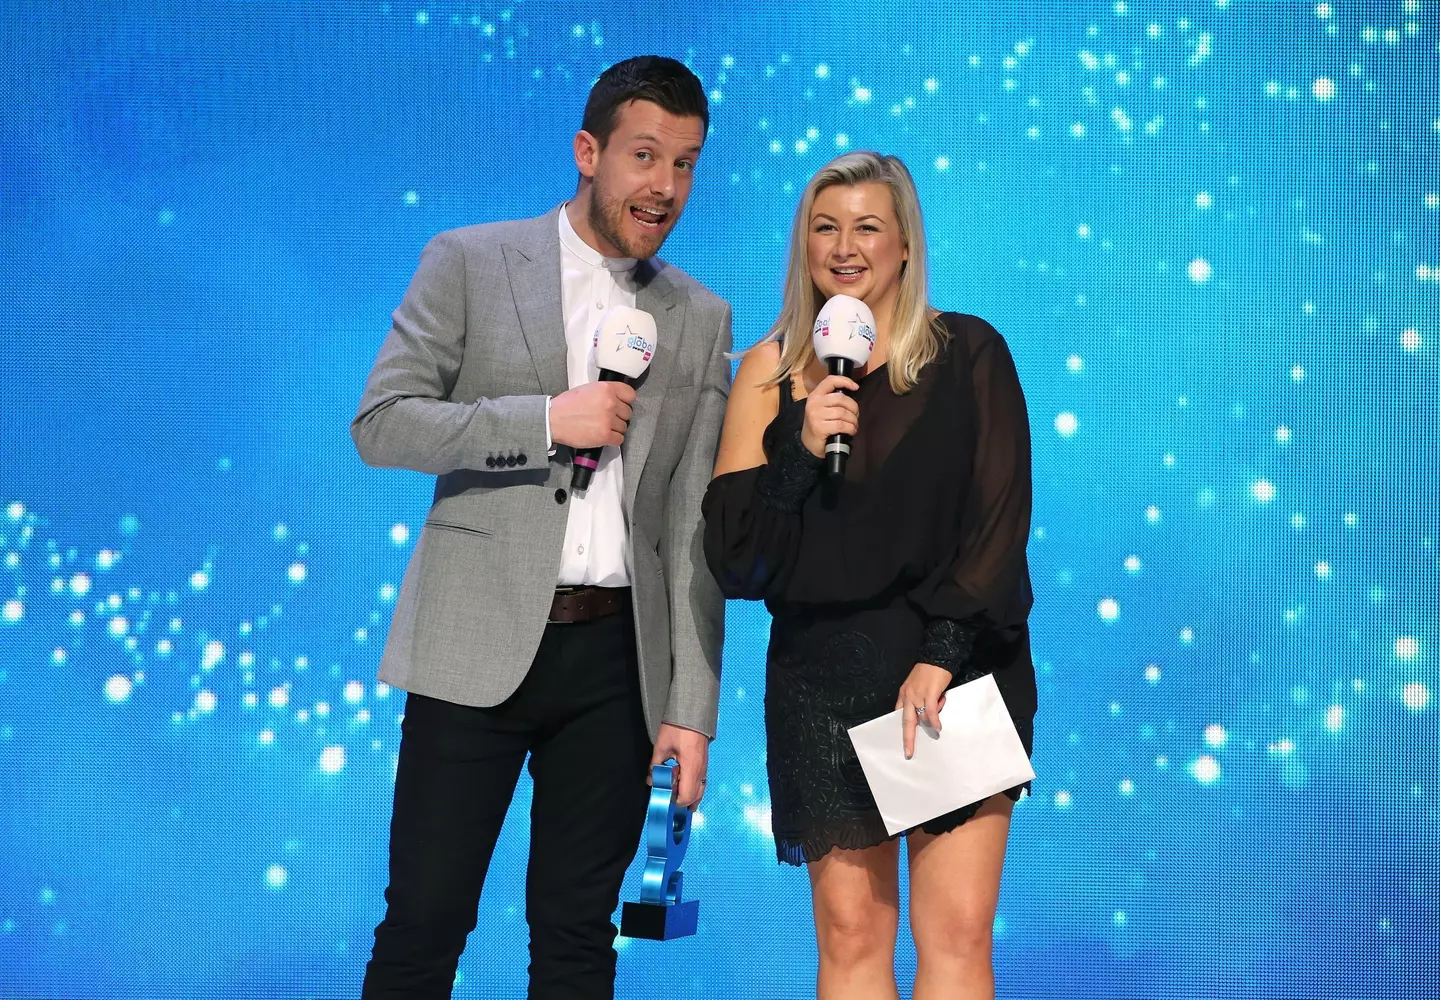 Chris Ramsey and Rosie Ramsey present the award for Best Song of 2019 on stage at the Global Awards 2020,